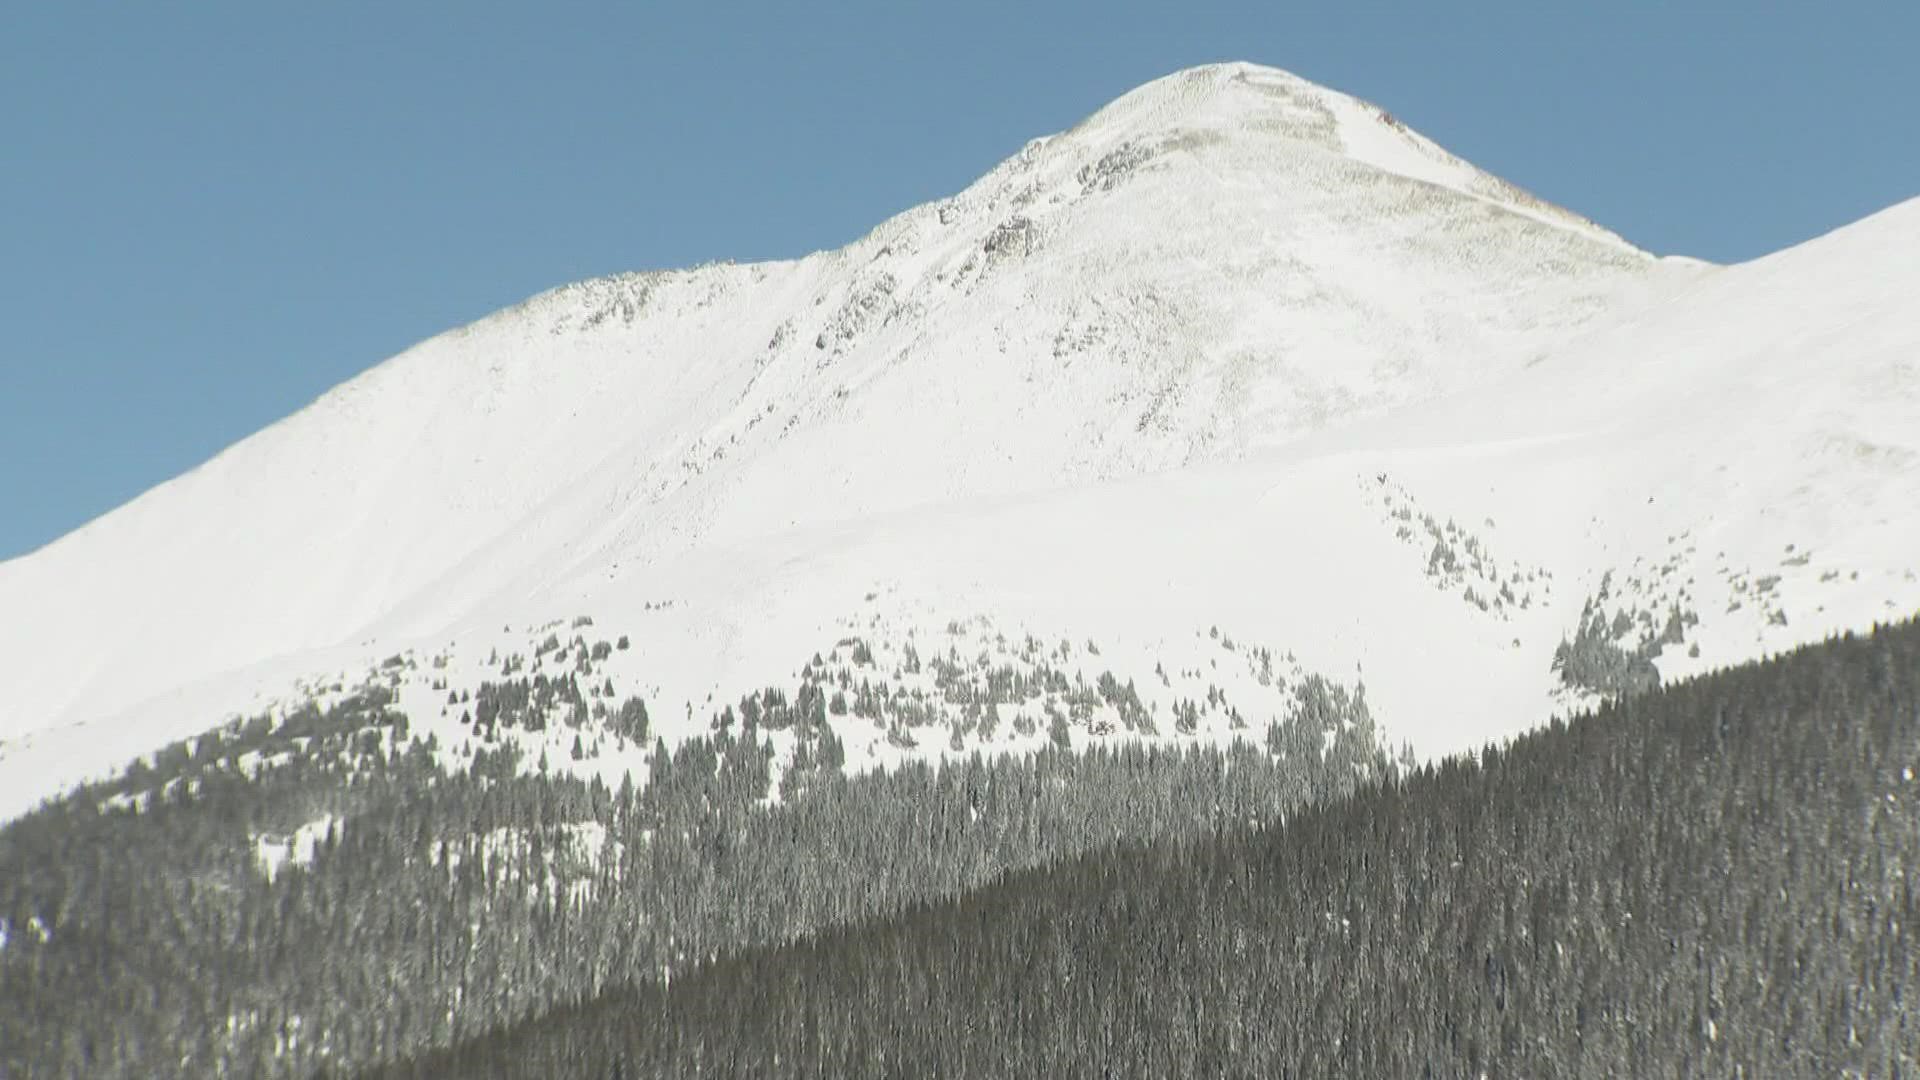 The dangerous avalanche conditions coincided with the holidays, when more people went out to ski.